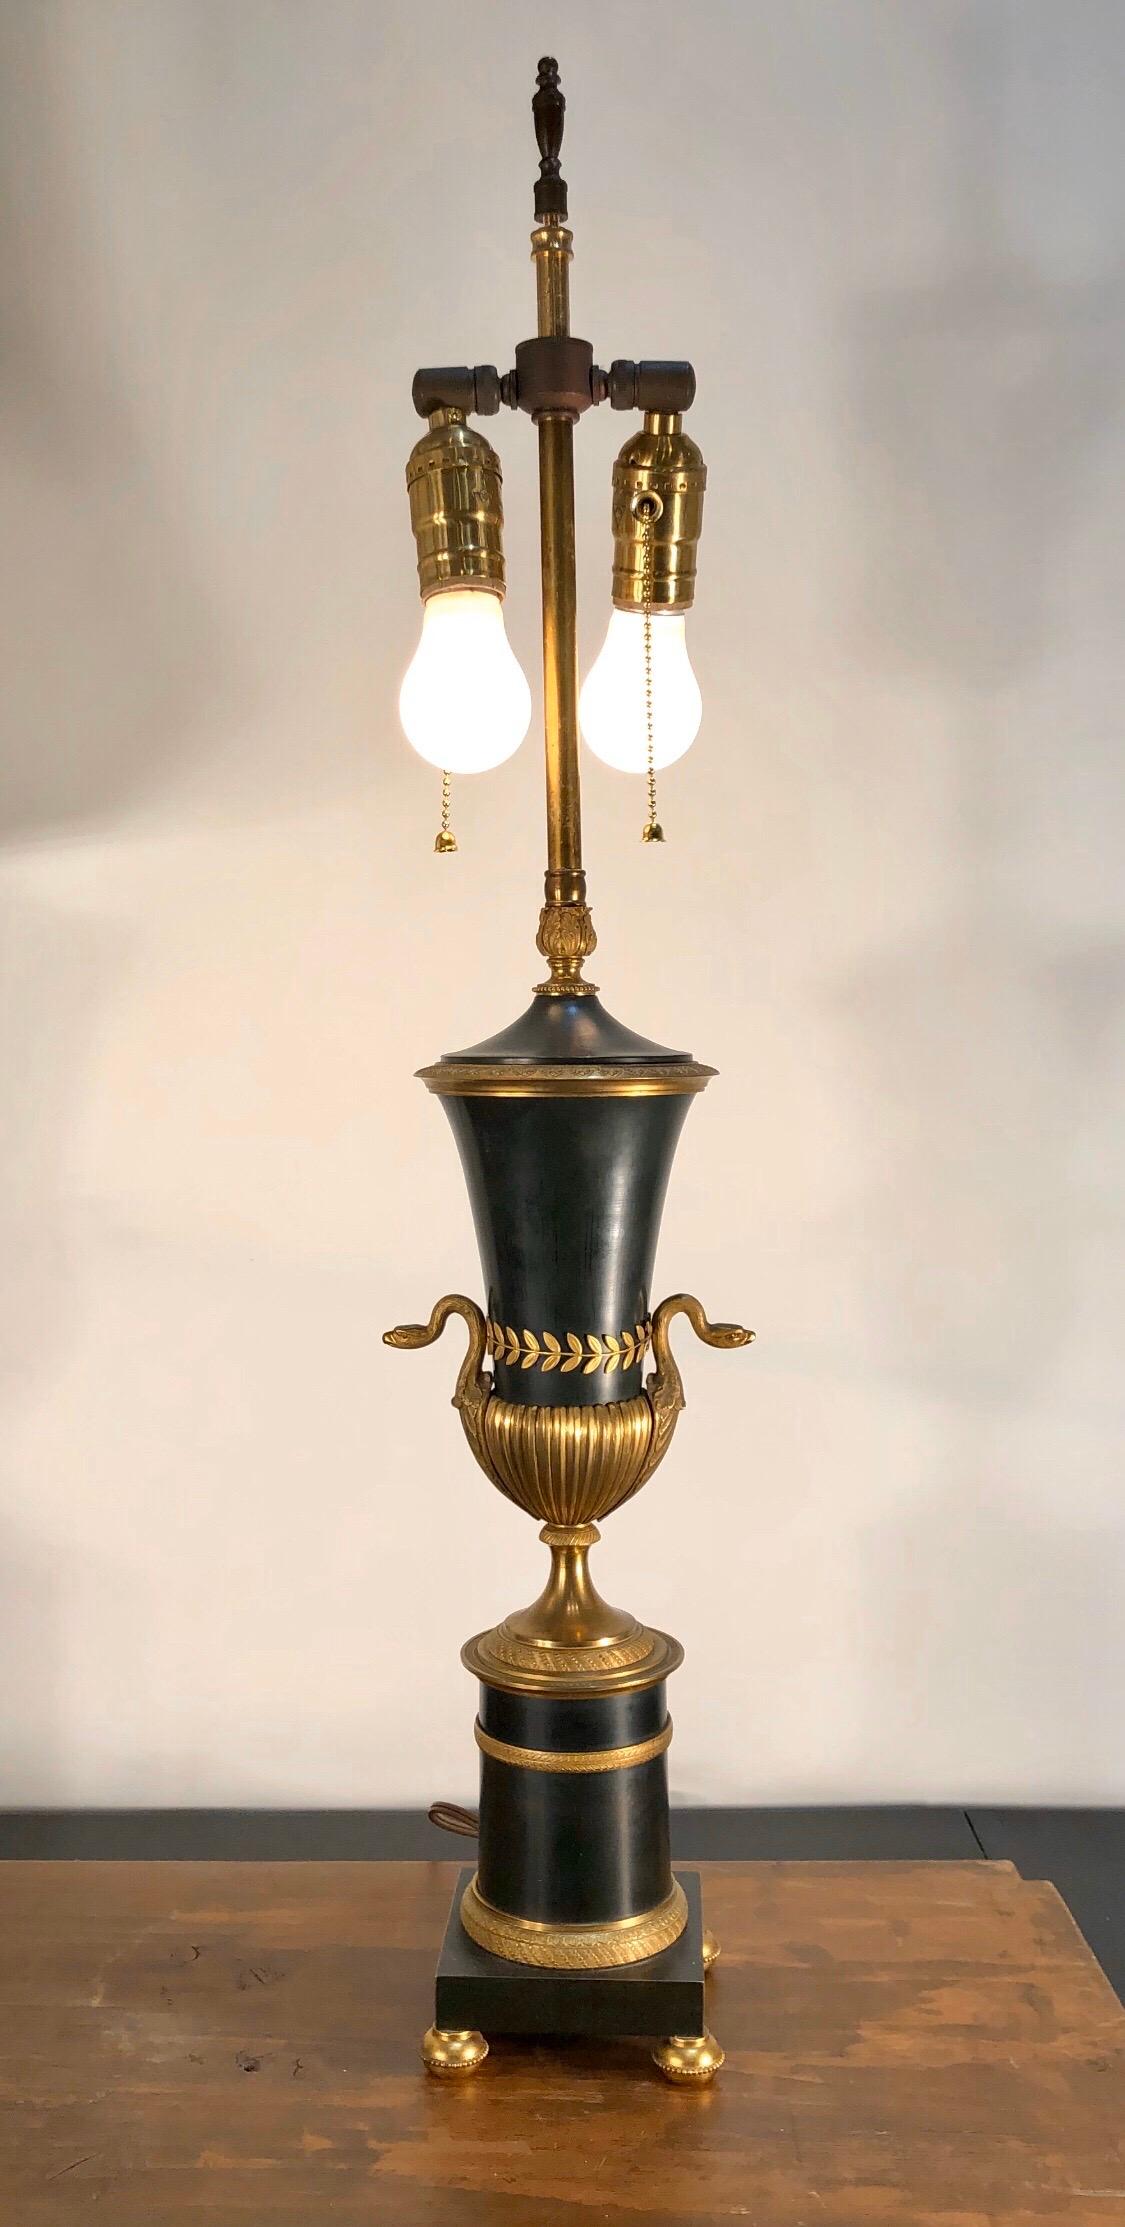 19th Century French Empire Lamps with Bronze Urns and Ormolu-Mounted Swans, Pair 3